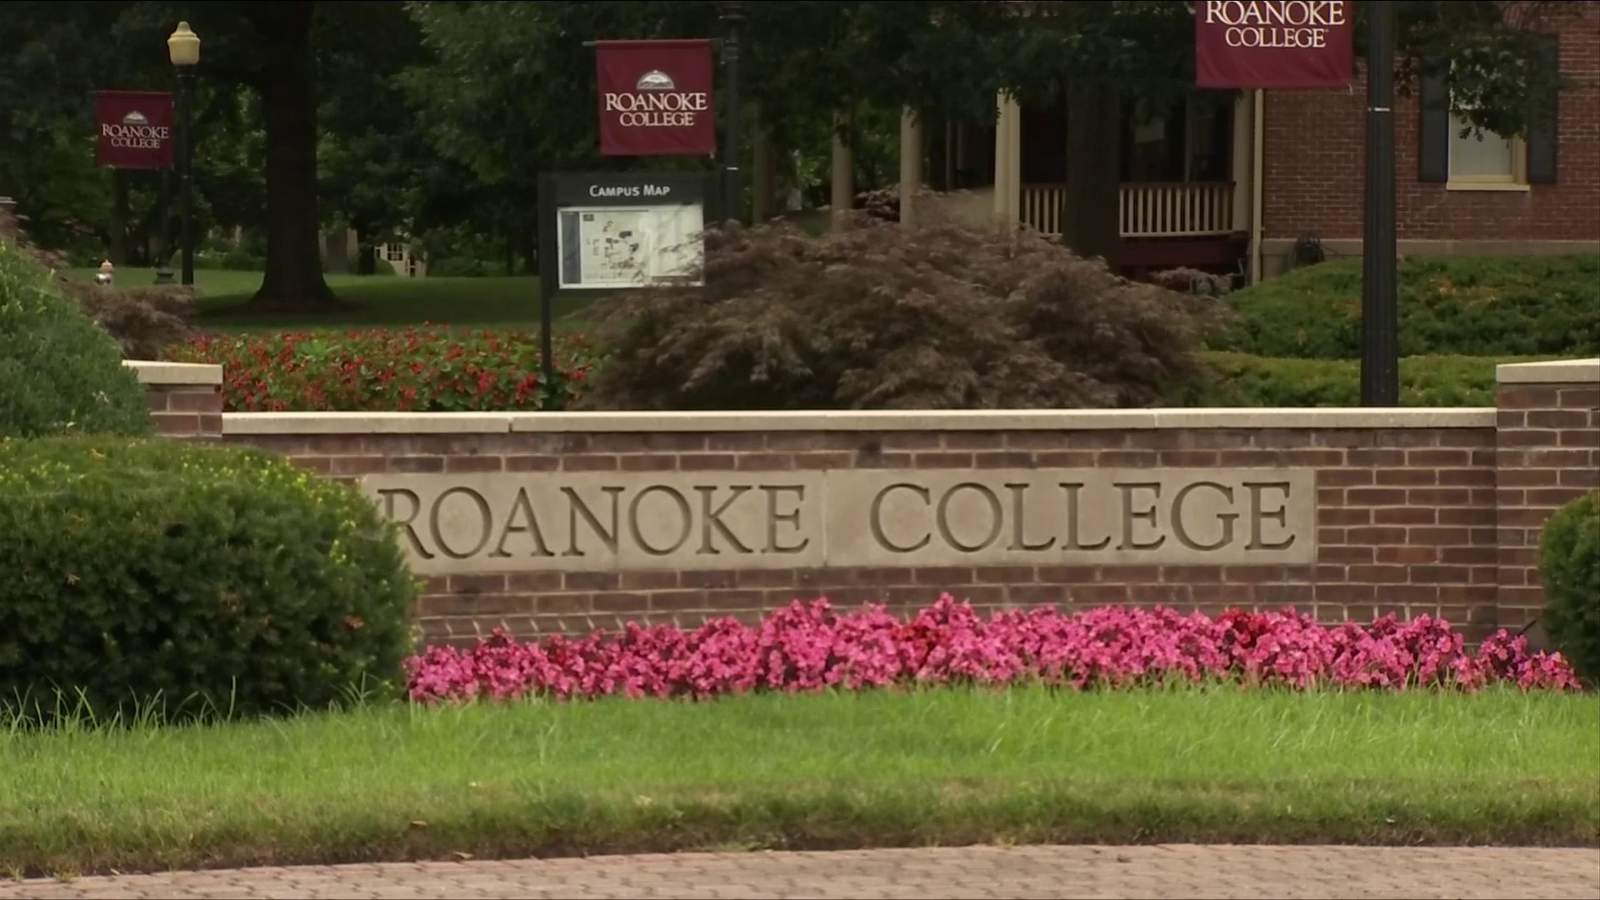 Petition calls for accountability regarding how Roanoke College handles misconduct cases